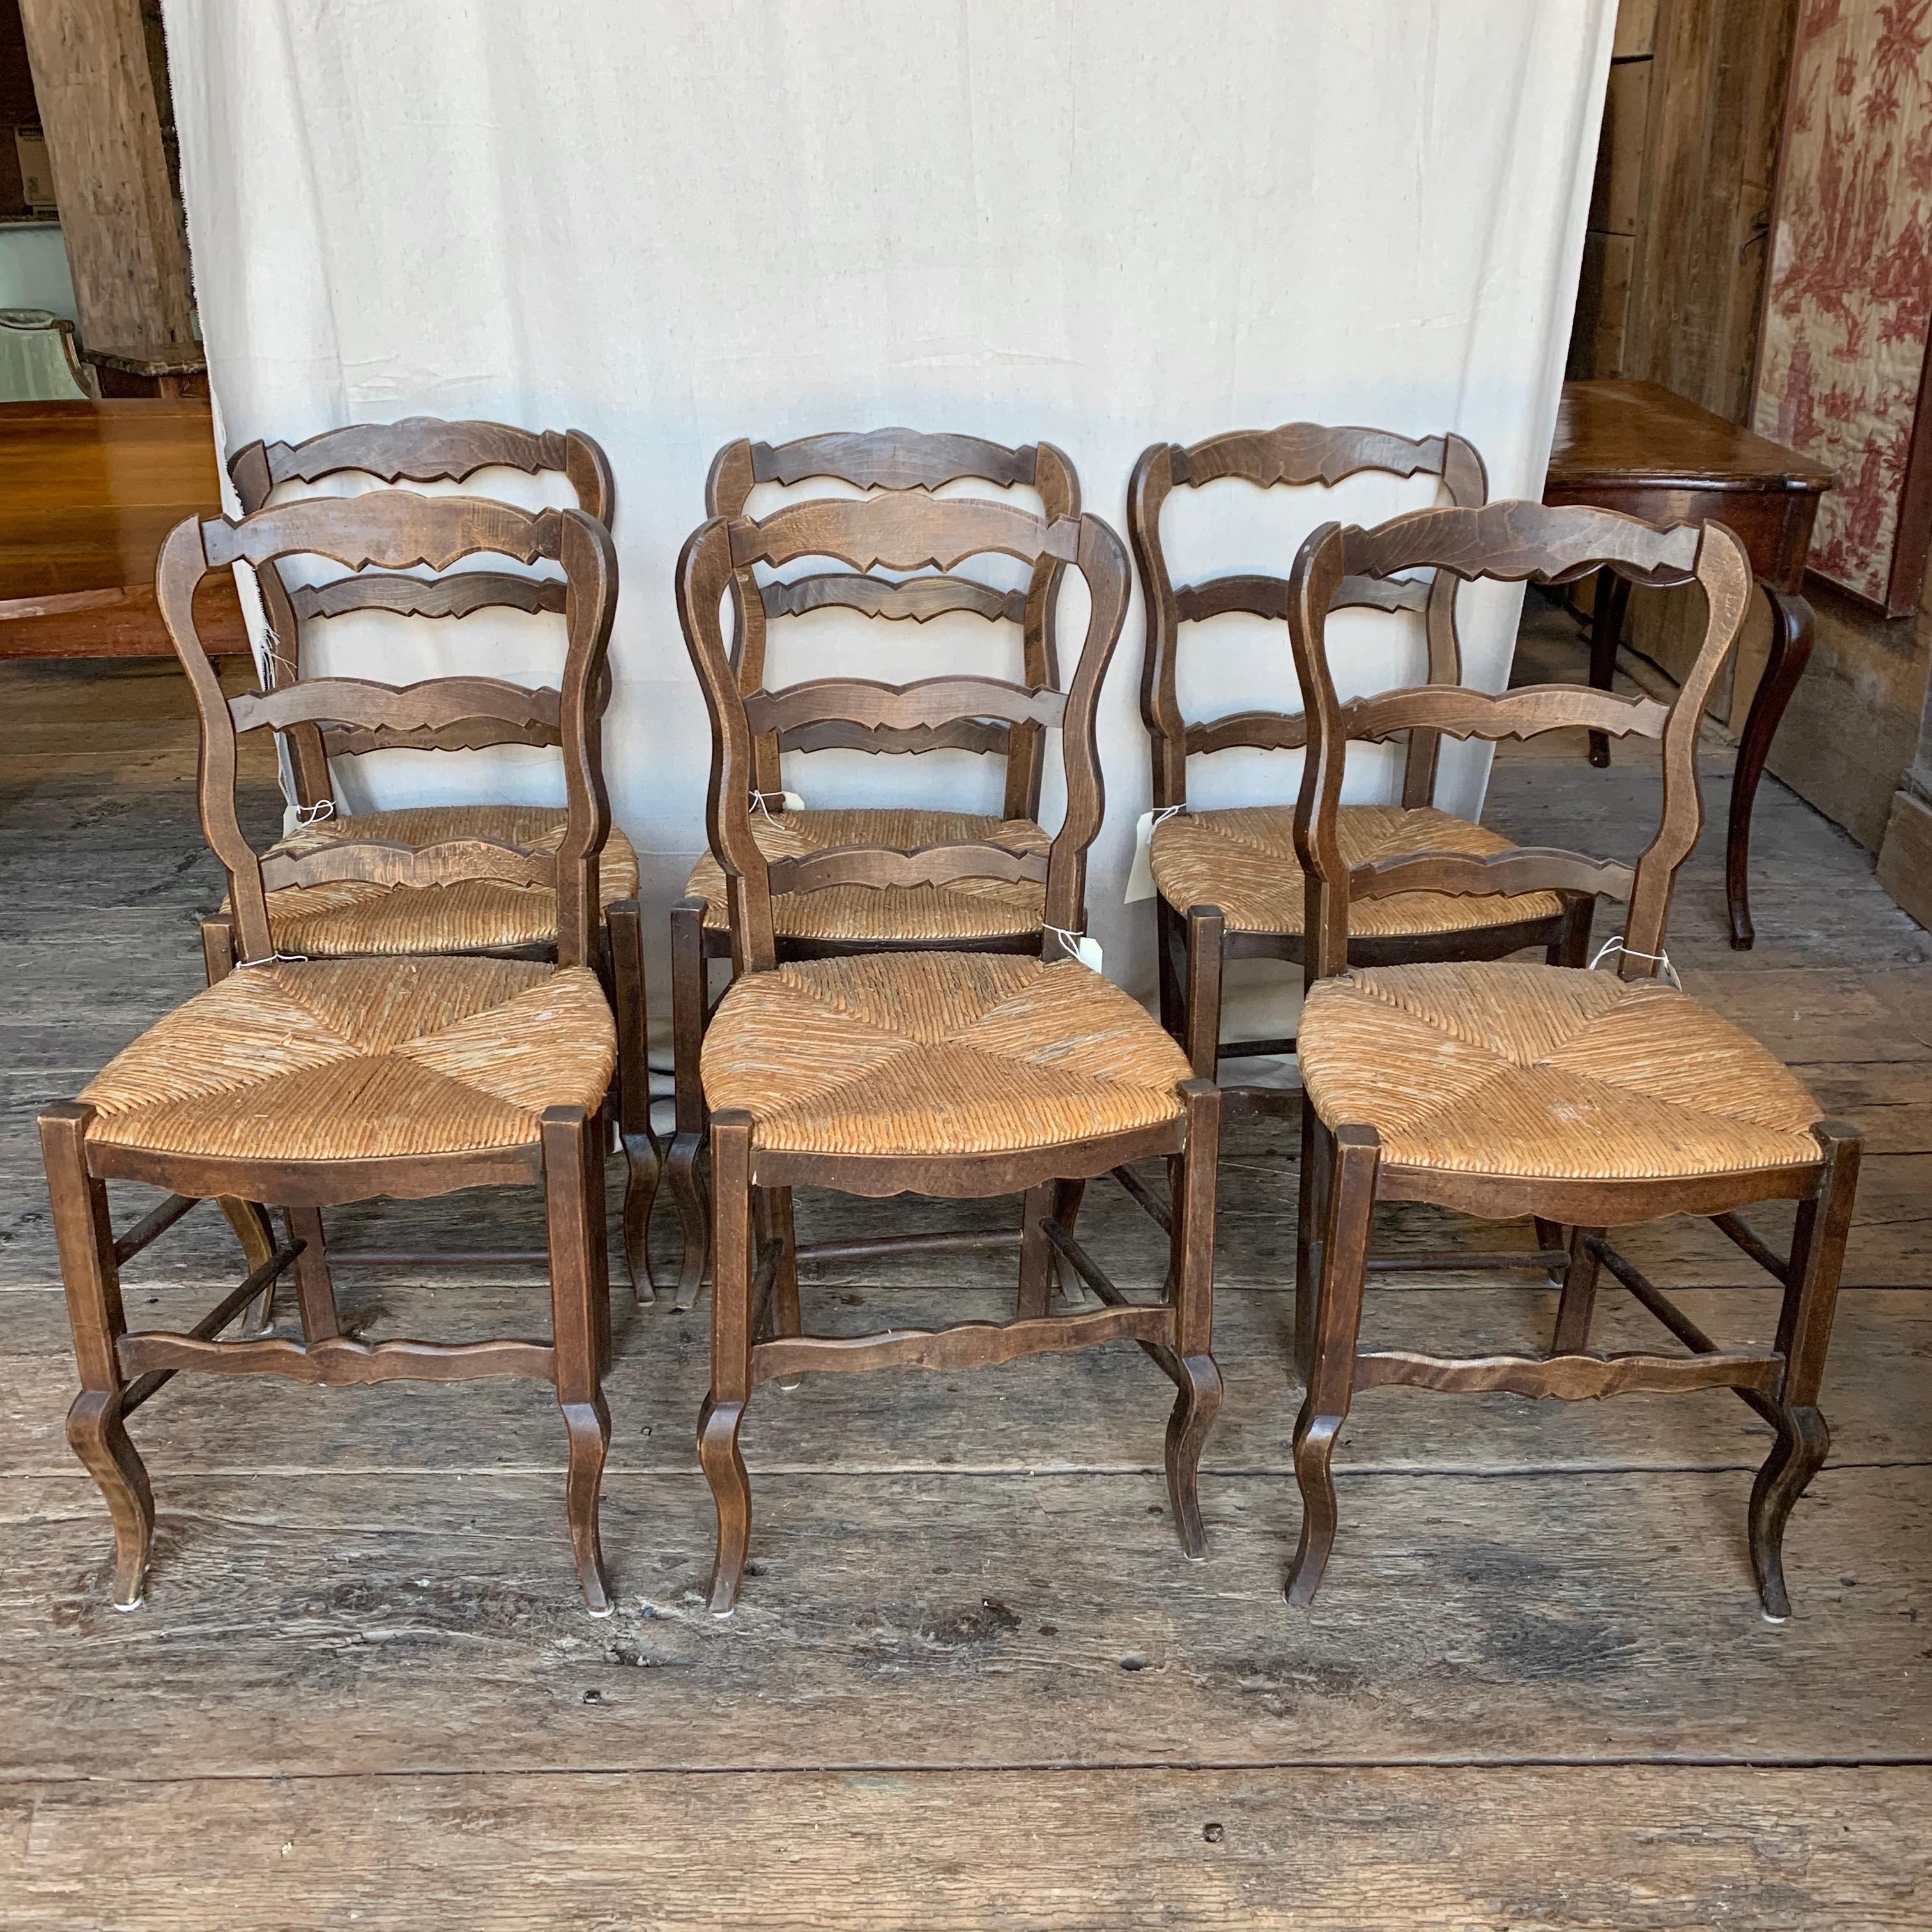 A set of 6 French Country ladder-back dining chairs in stained beech wood, with rush seats, circa 1870.